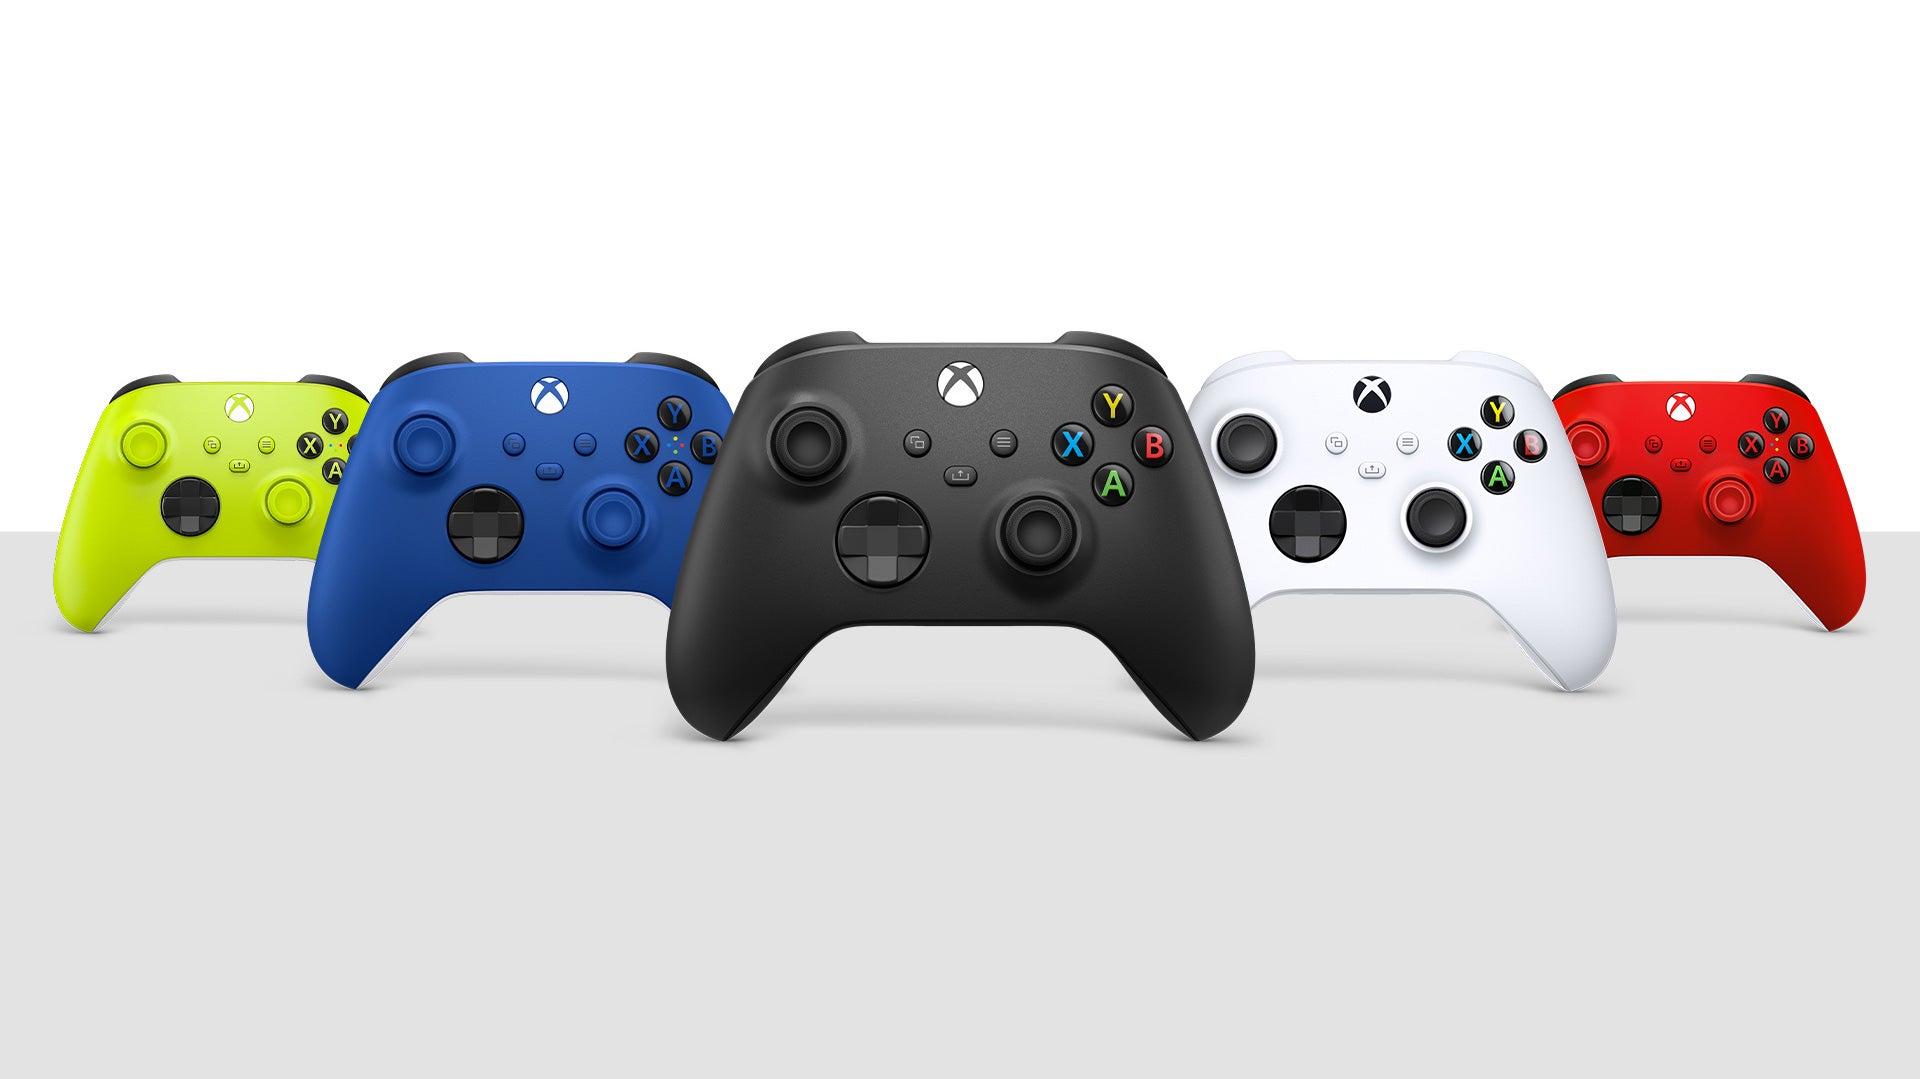 Grab an Xbox Wireless Controller for $40 after a $20 holiday discount